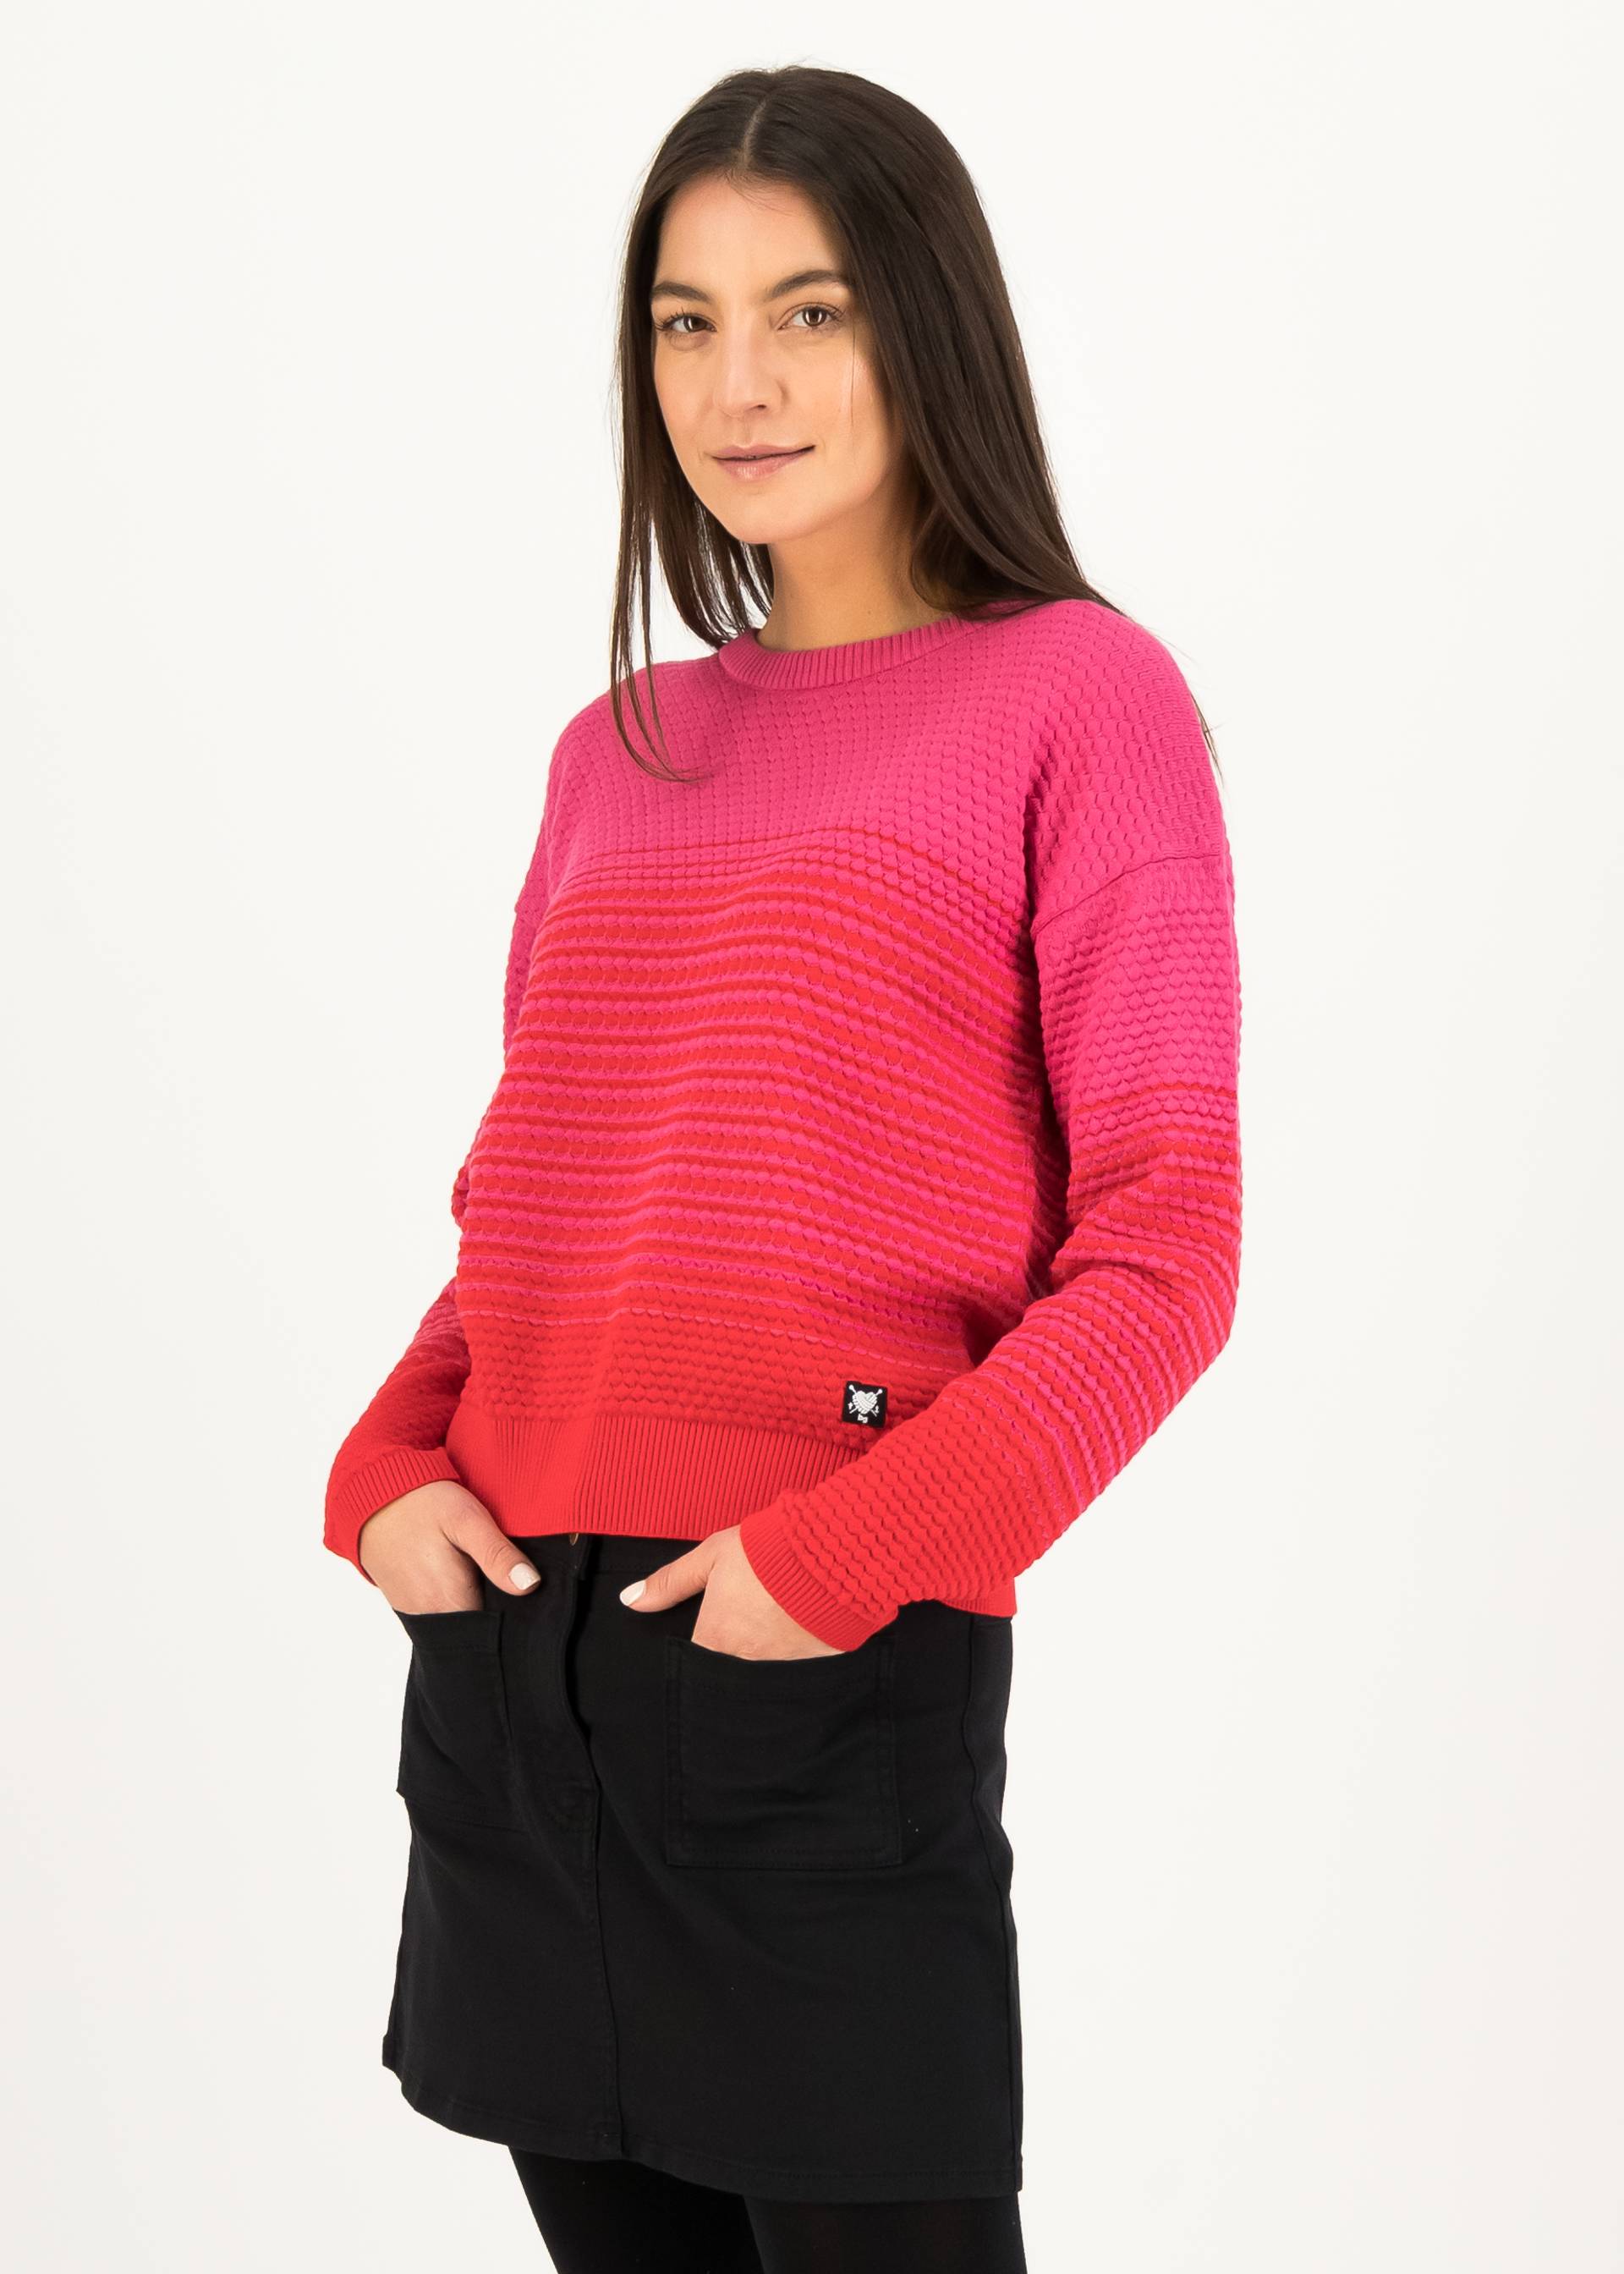 Knitted Jumper Chic Promenade, love gradient knit, Knitted Jumpers & Cardigans, Red